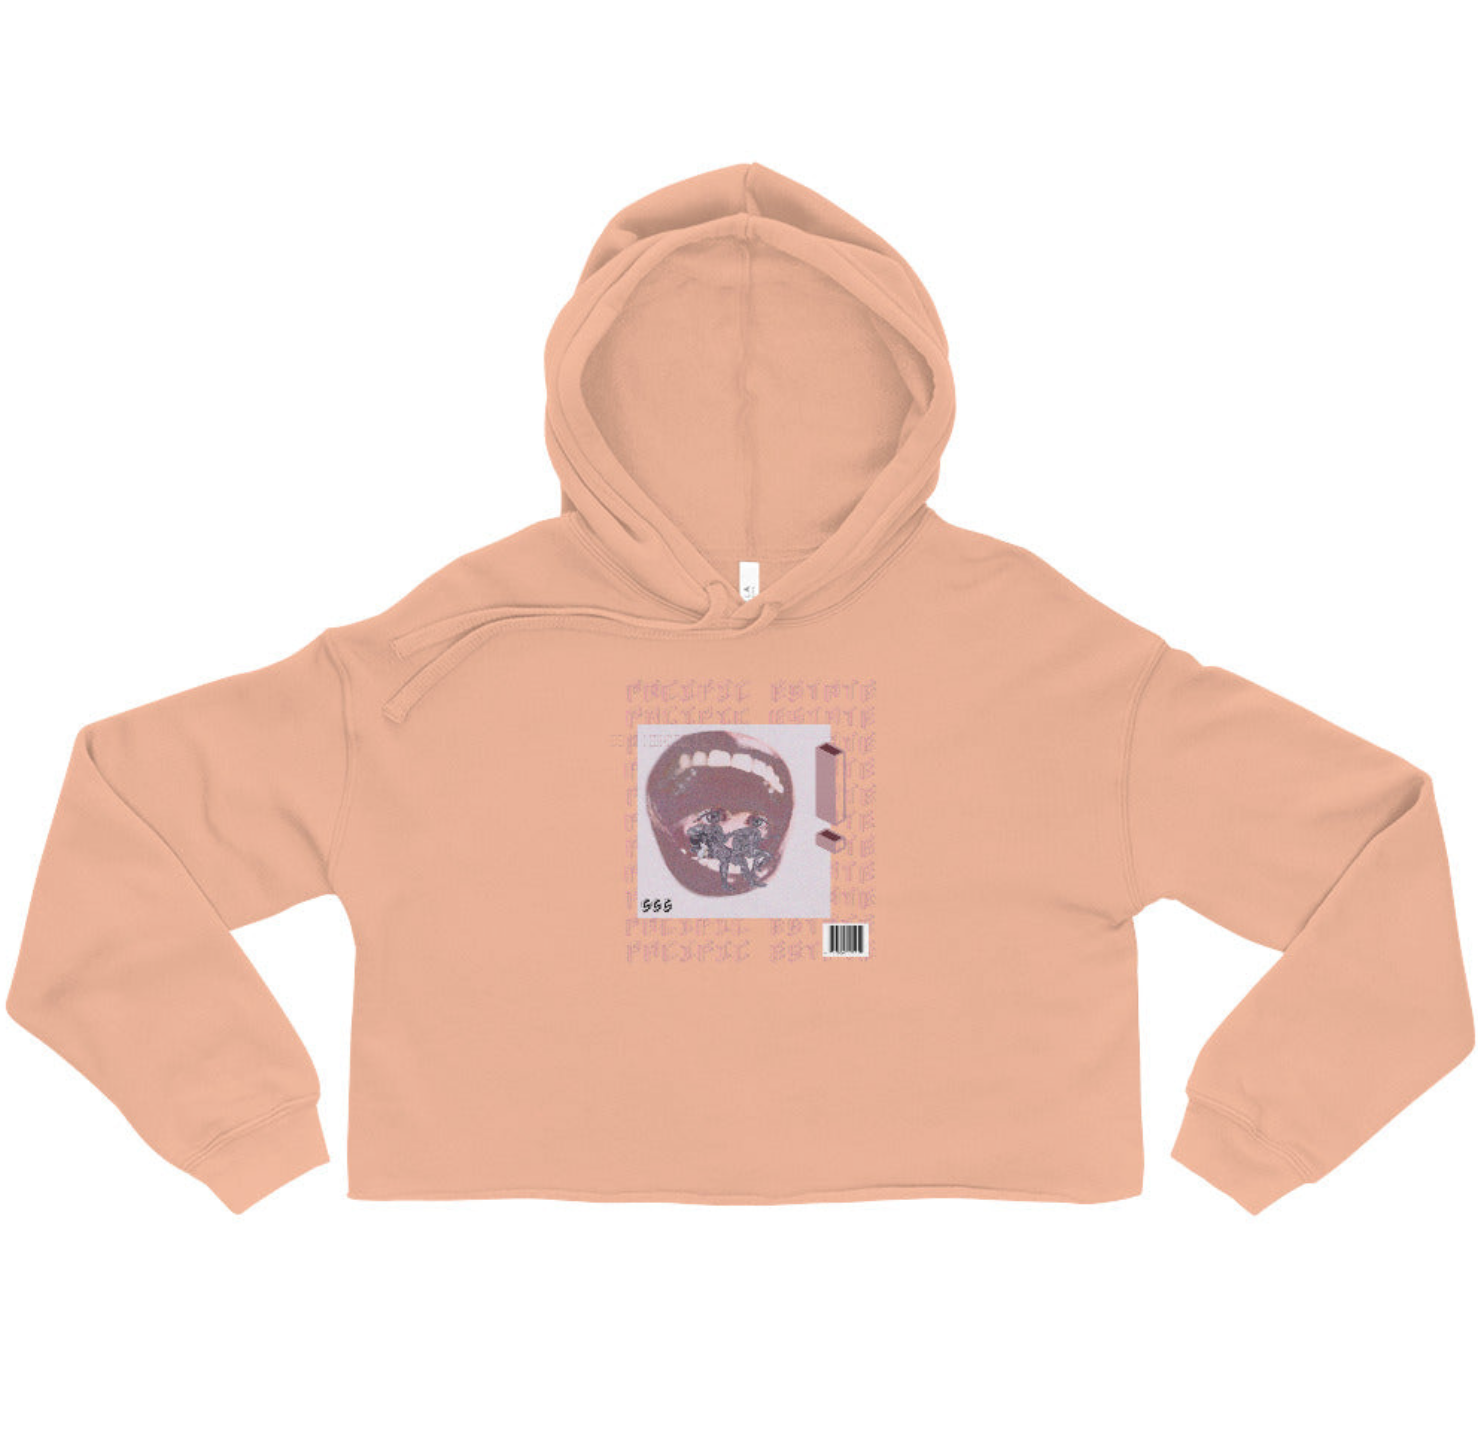 v.1 Cropped Hoodie - Small - DEMO STOCK